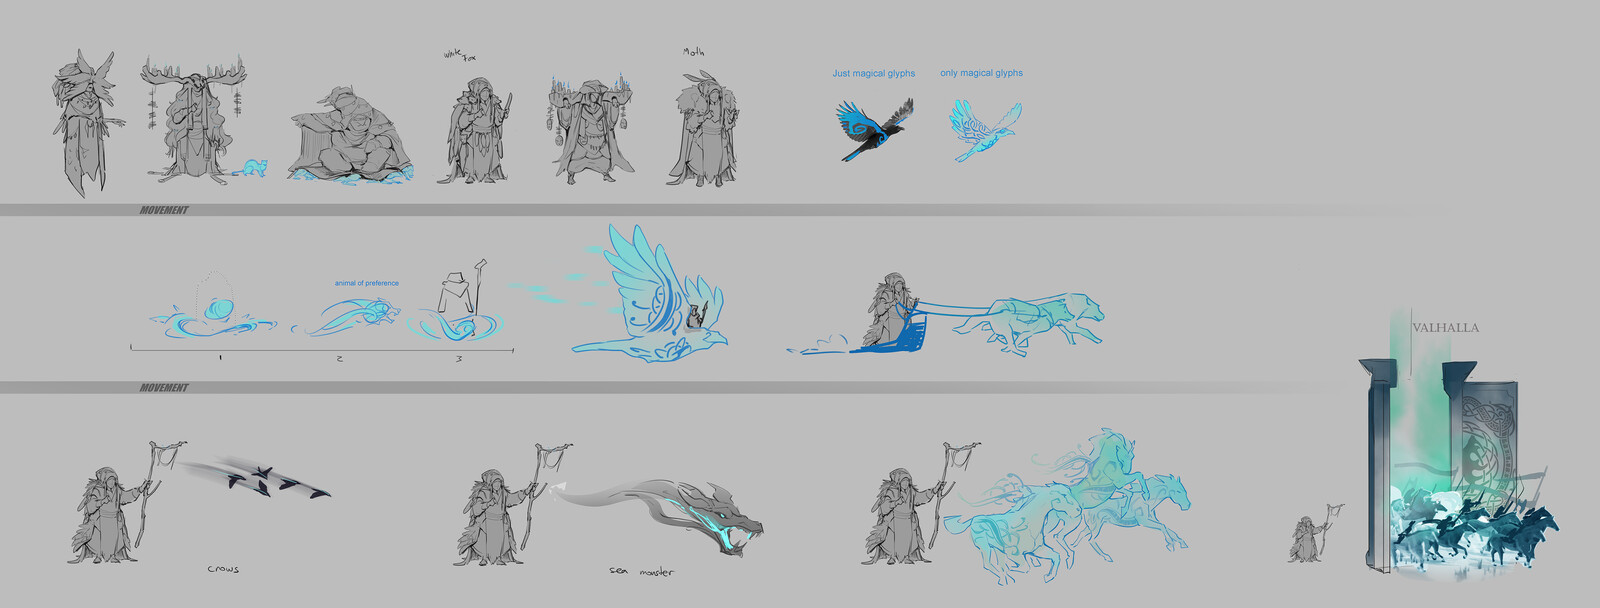 Early concepts - Viking witch/glass cannon/ability to transform into a faster form 